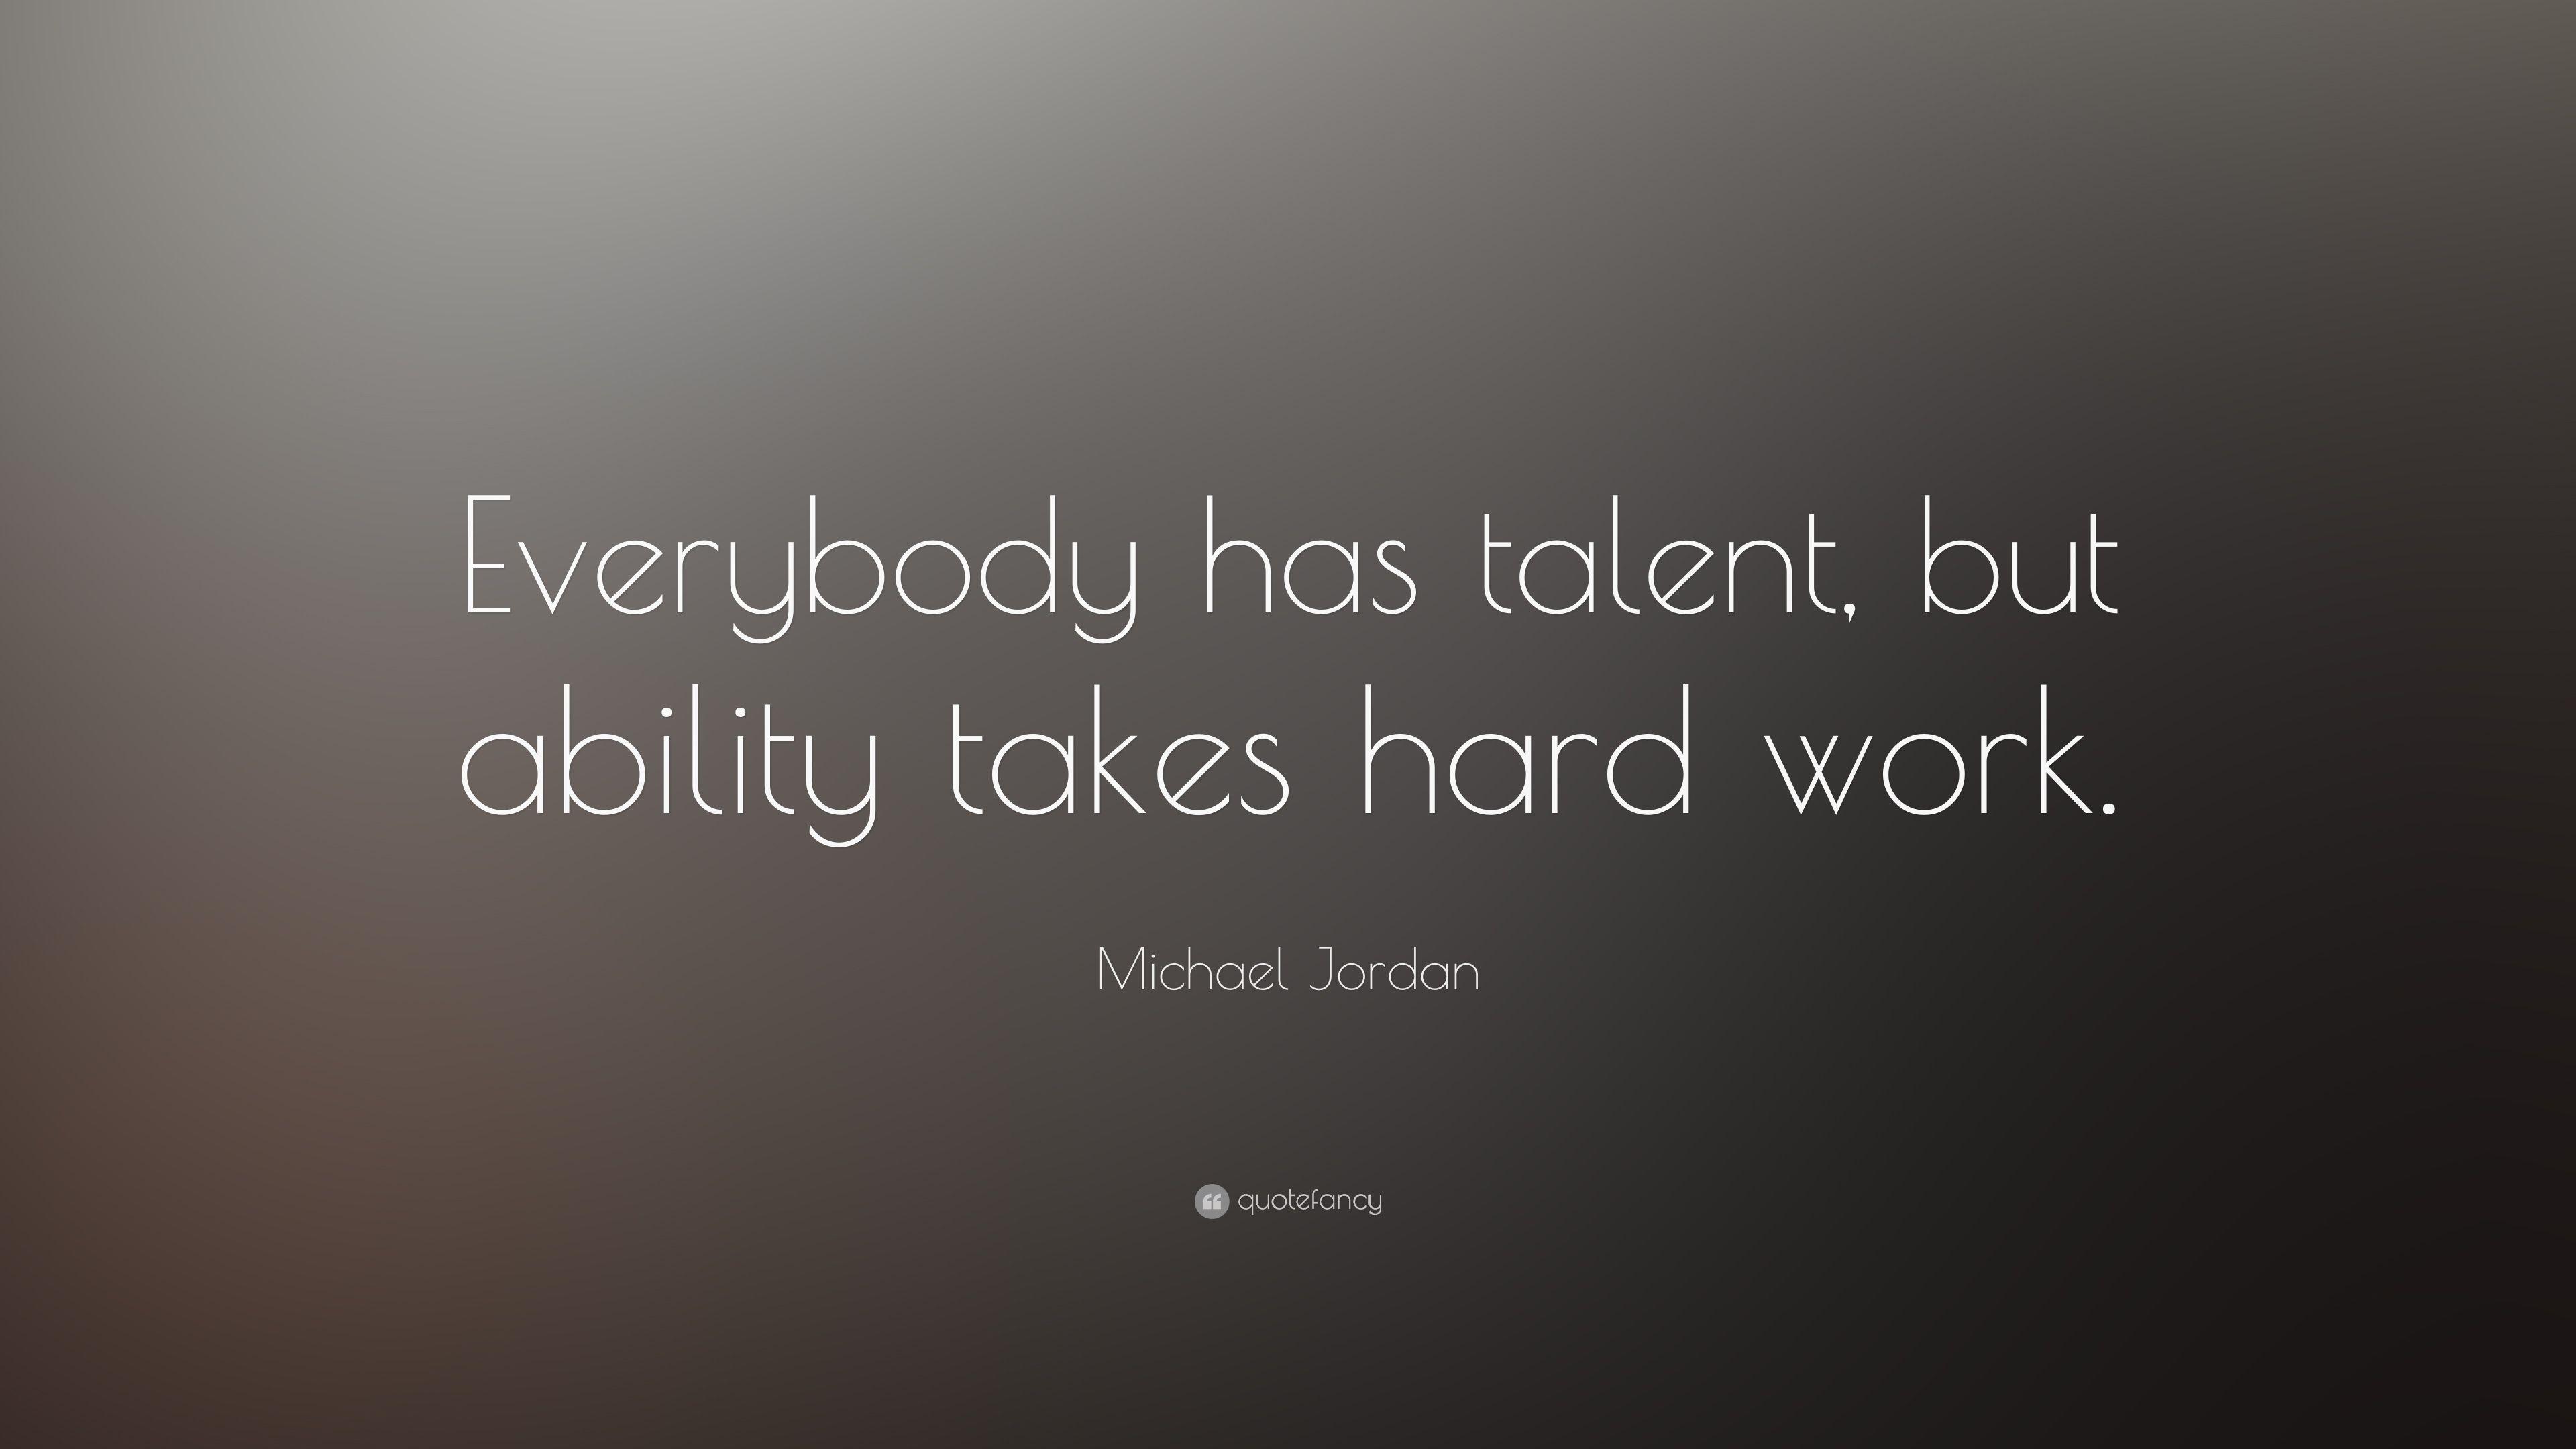 Michael Jordan Quote: “Everybody has talent, but ability takes